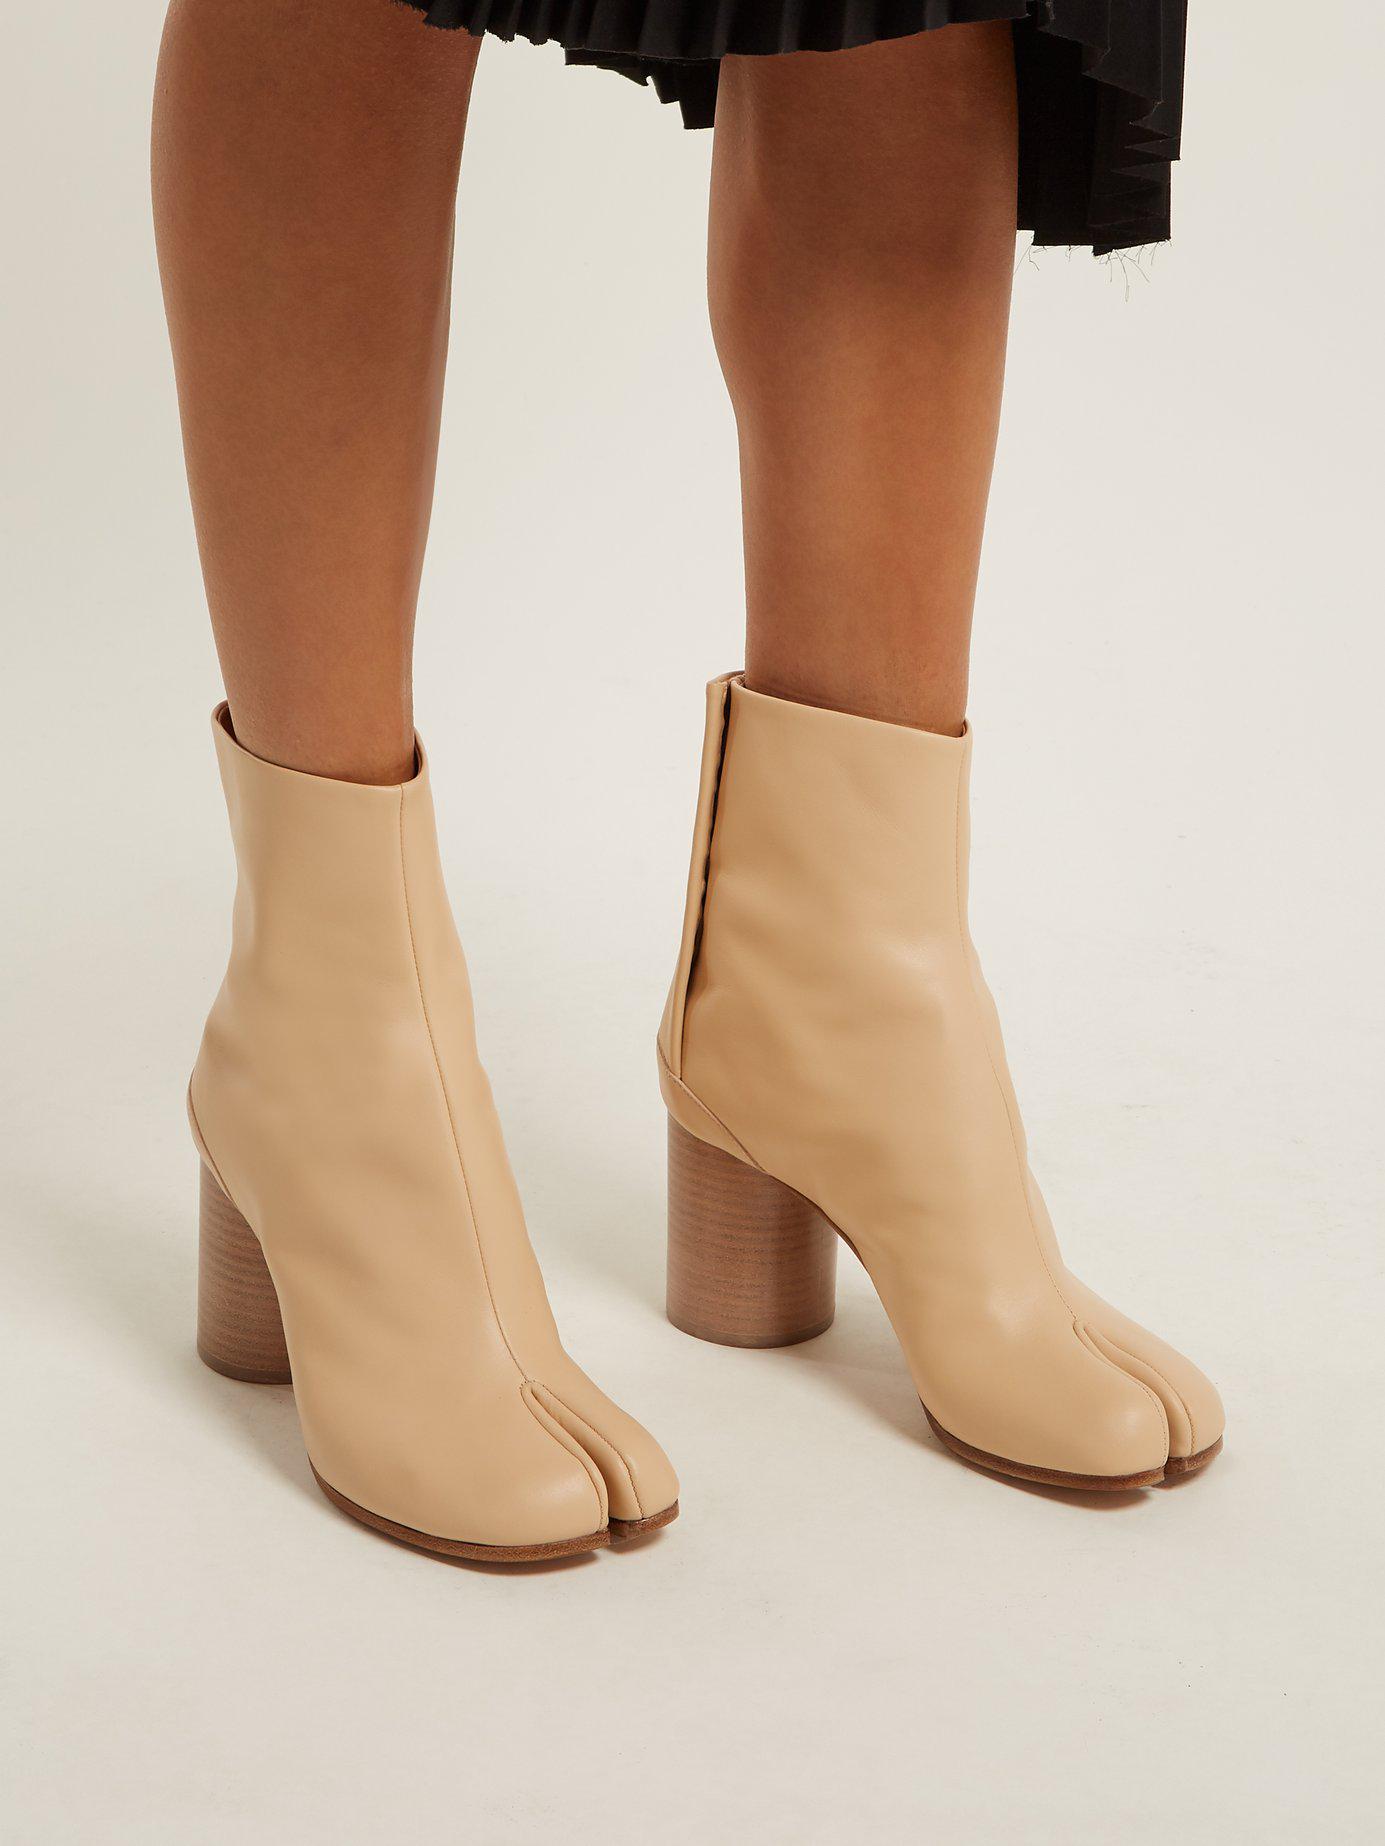 Maison Margiela Tabi Split Toe Leather Ankle Boots in Nude (Natural) - Lyst